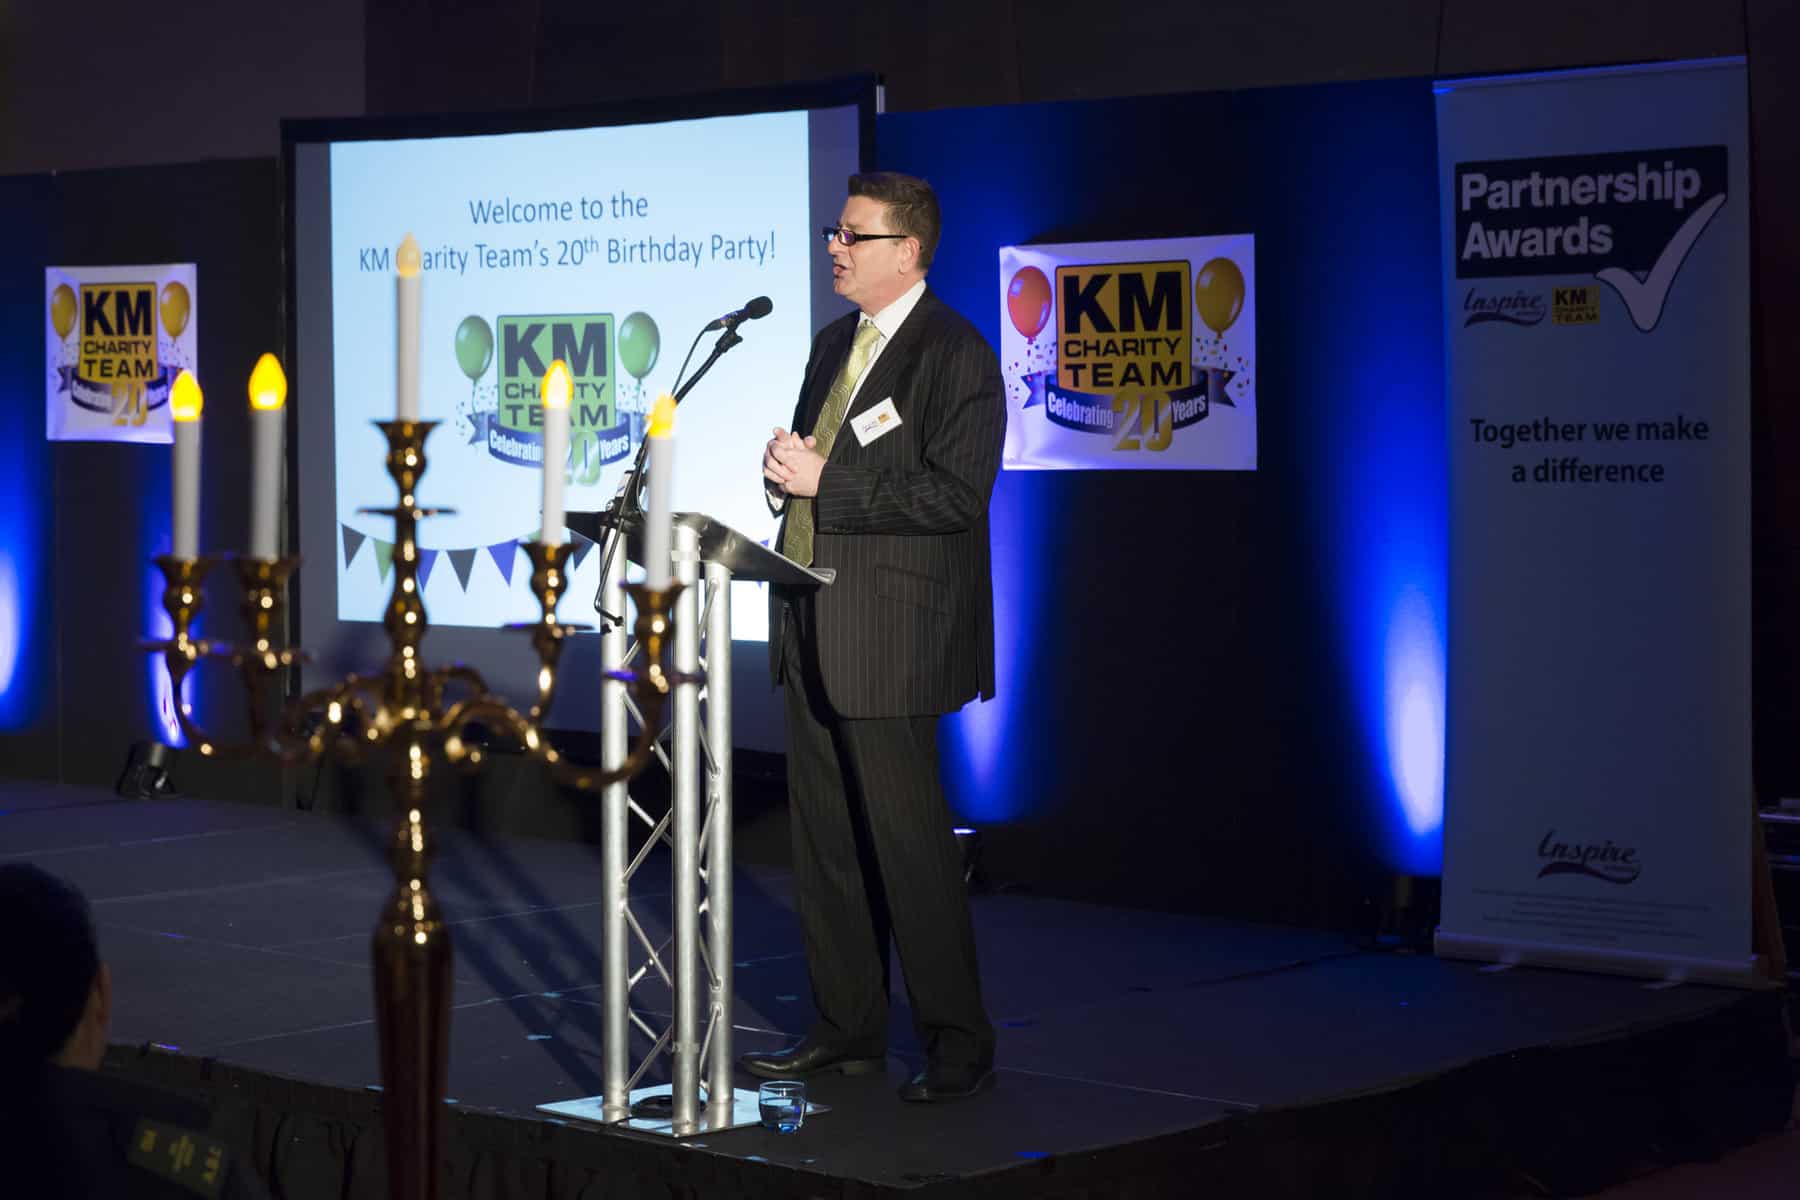 Countrystyle Attends KM Charity Partnership Awards 2020 (and 20th birthday!)